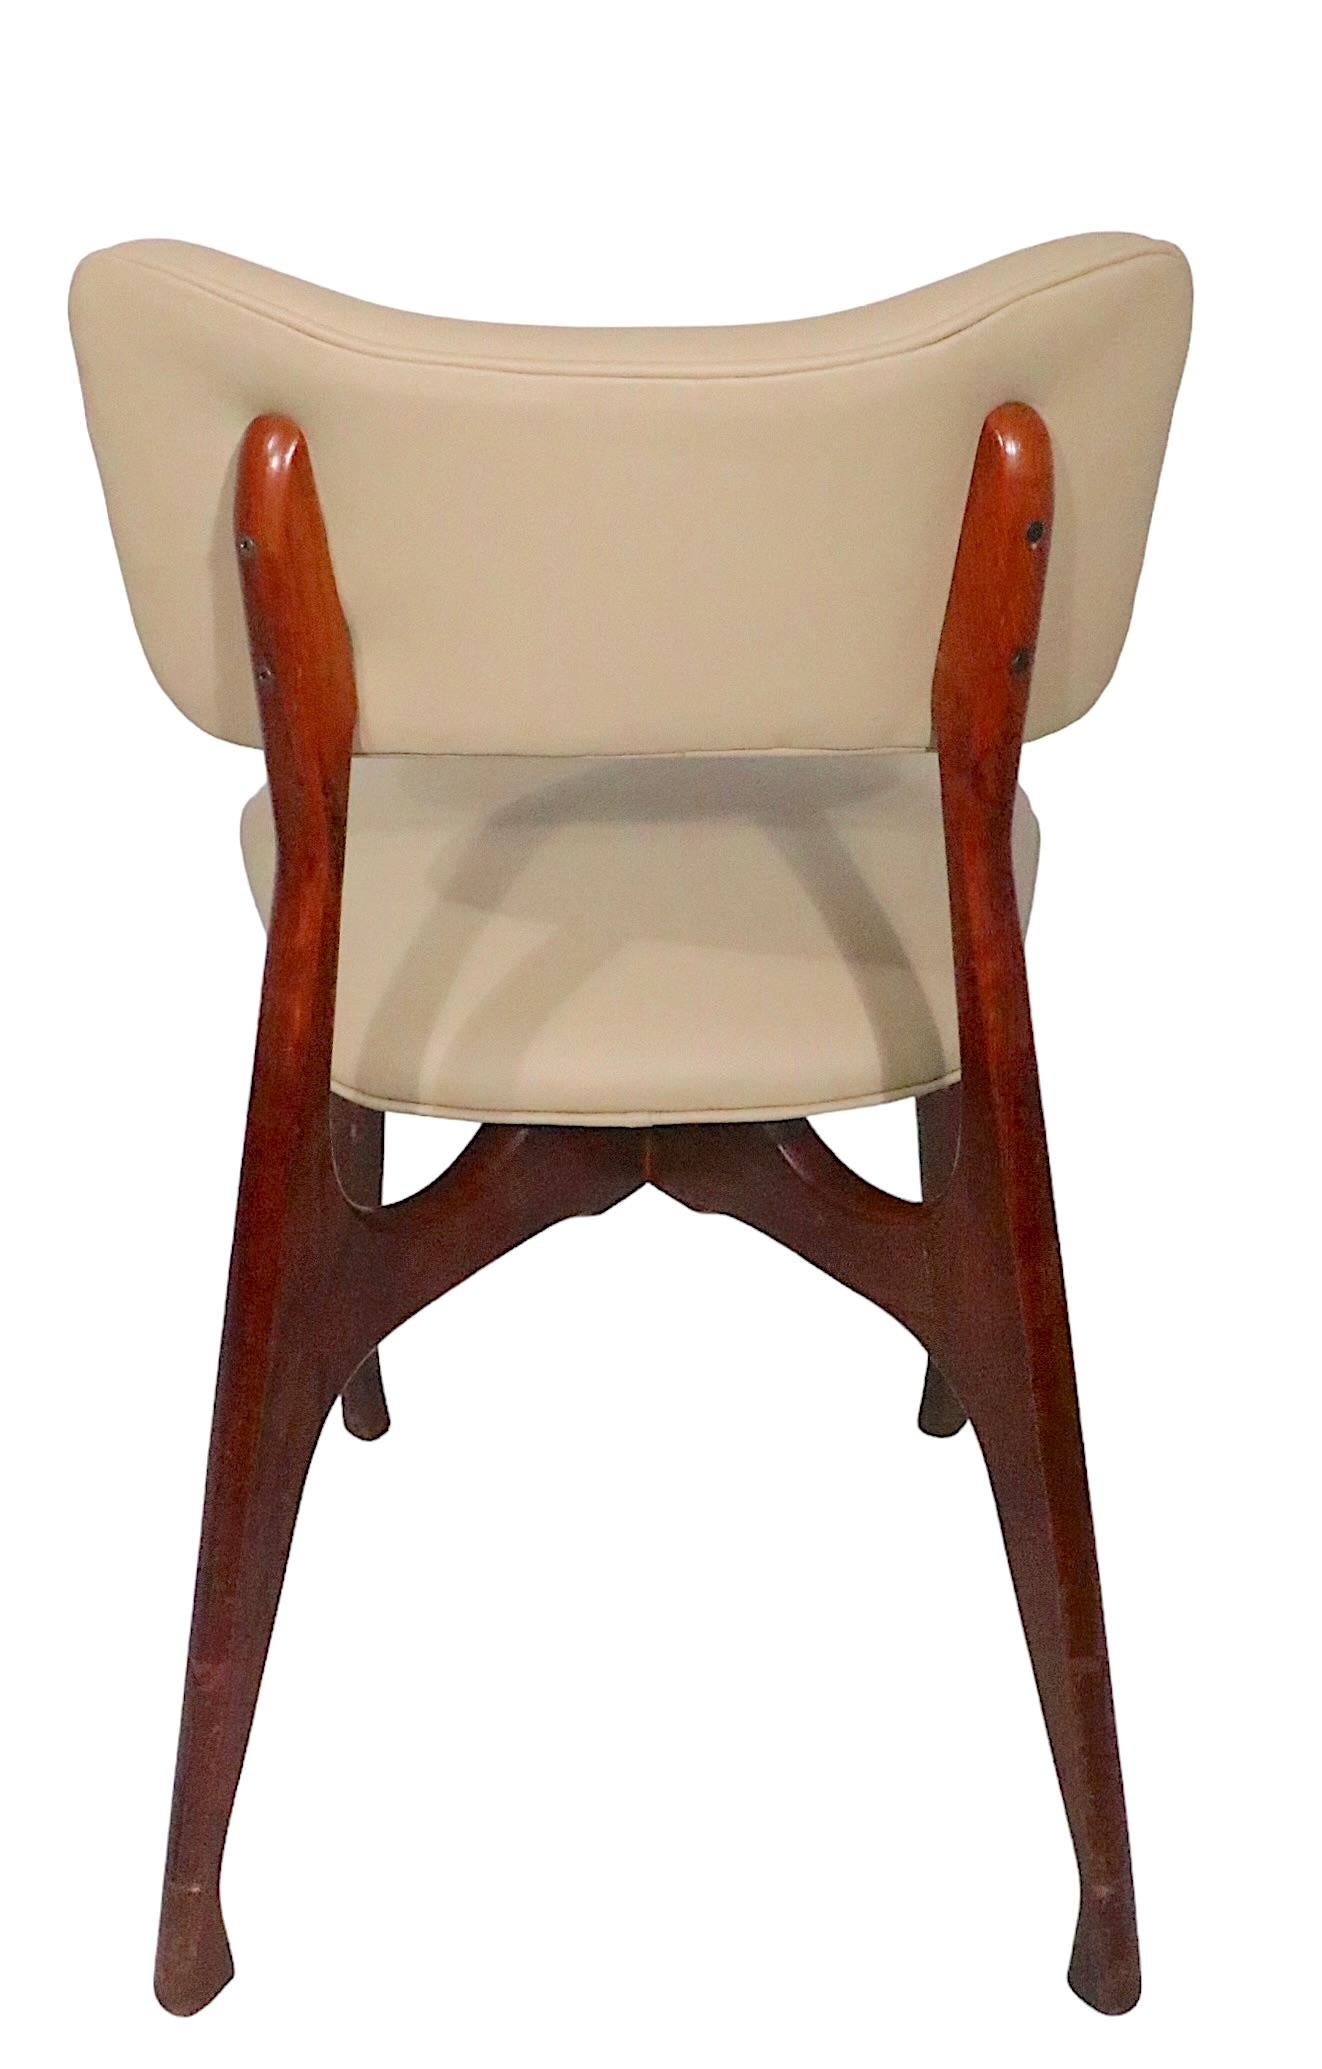 Pr. Midcentury Dining Side Chairs Att. to Ico Parisi, circa 1950s For Sale 9